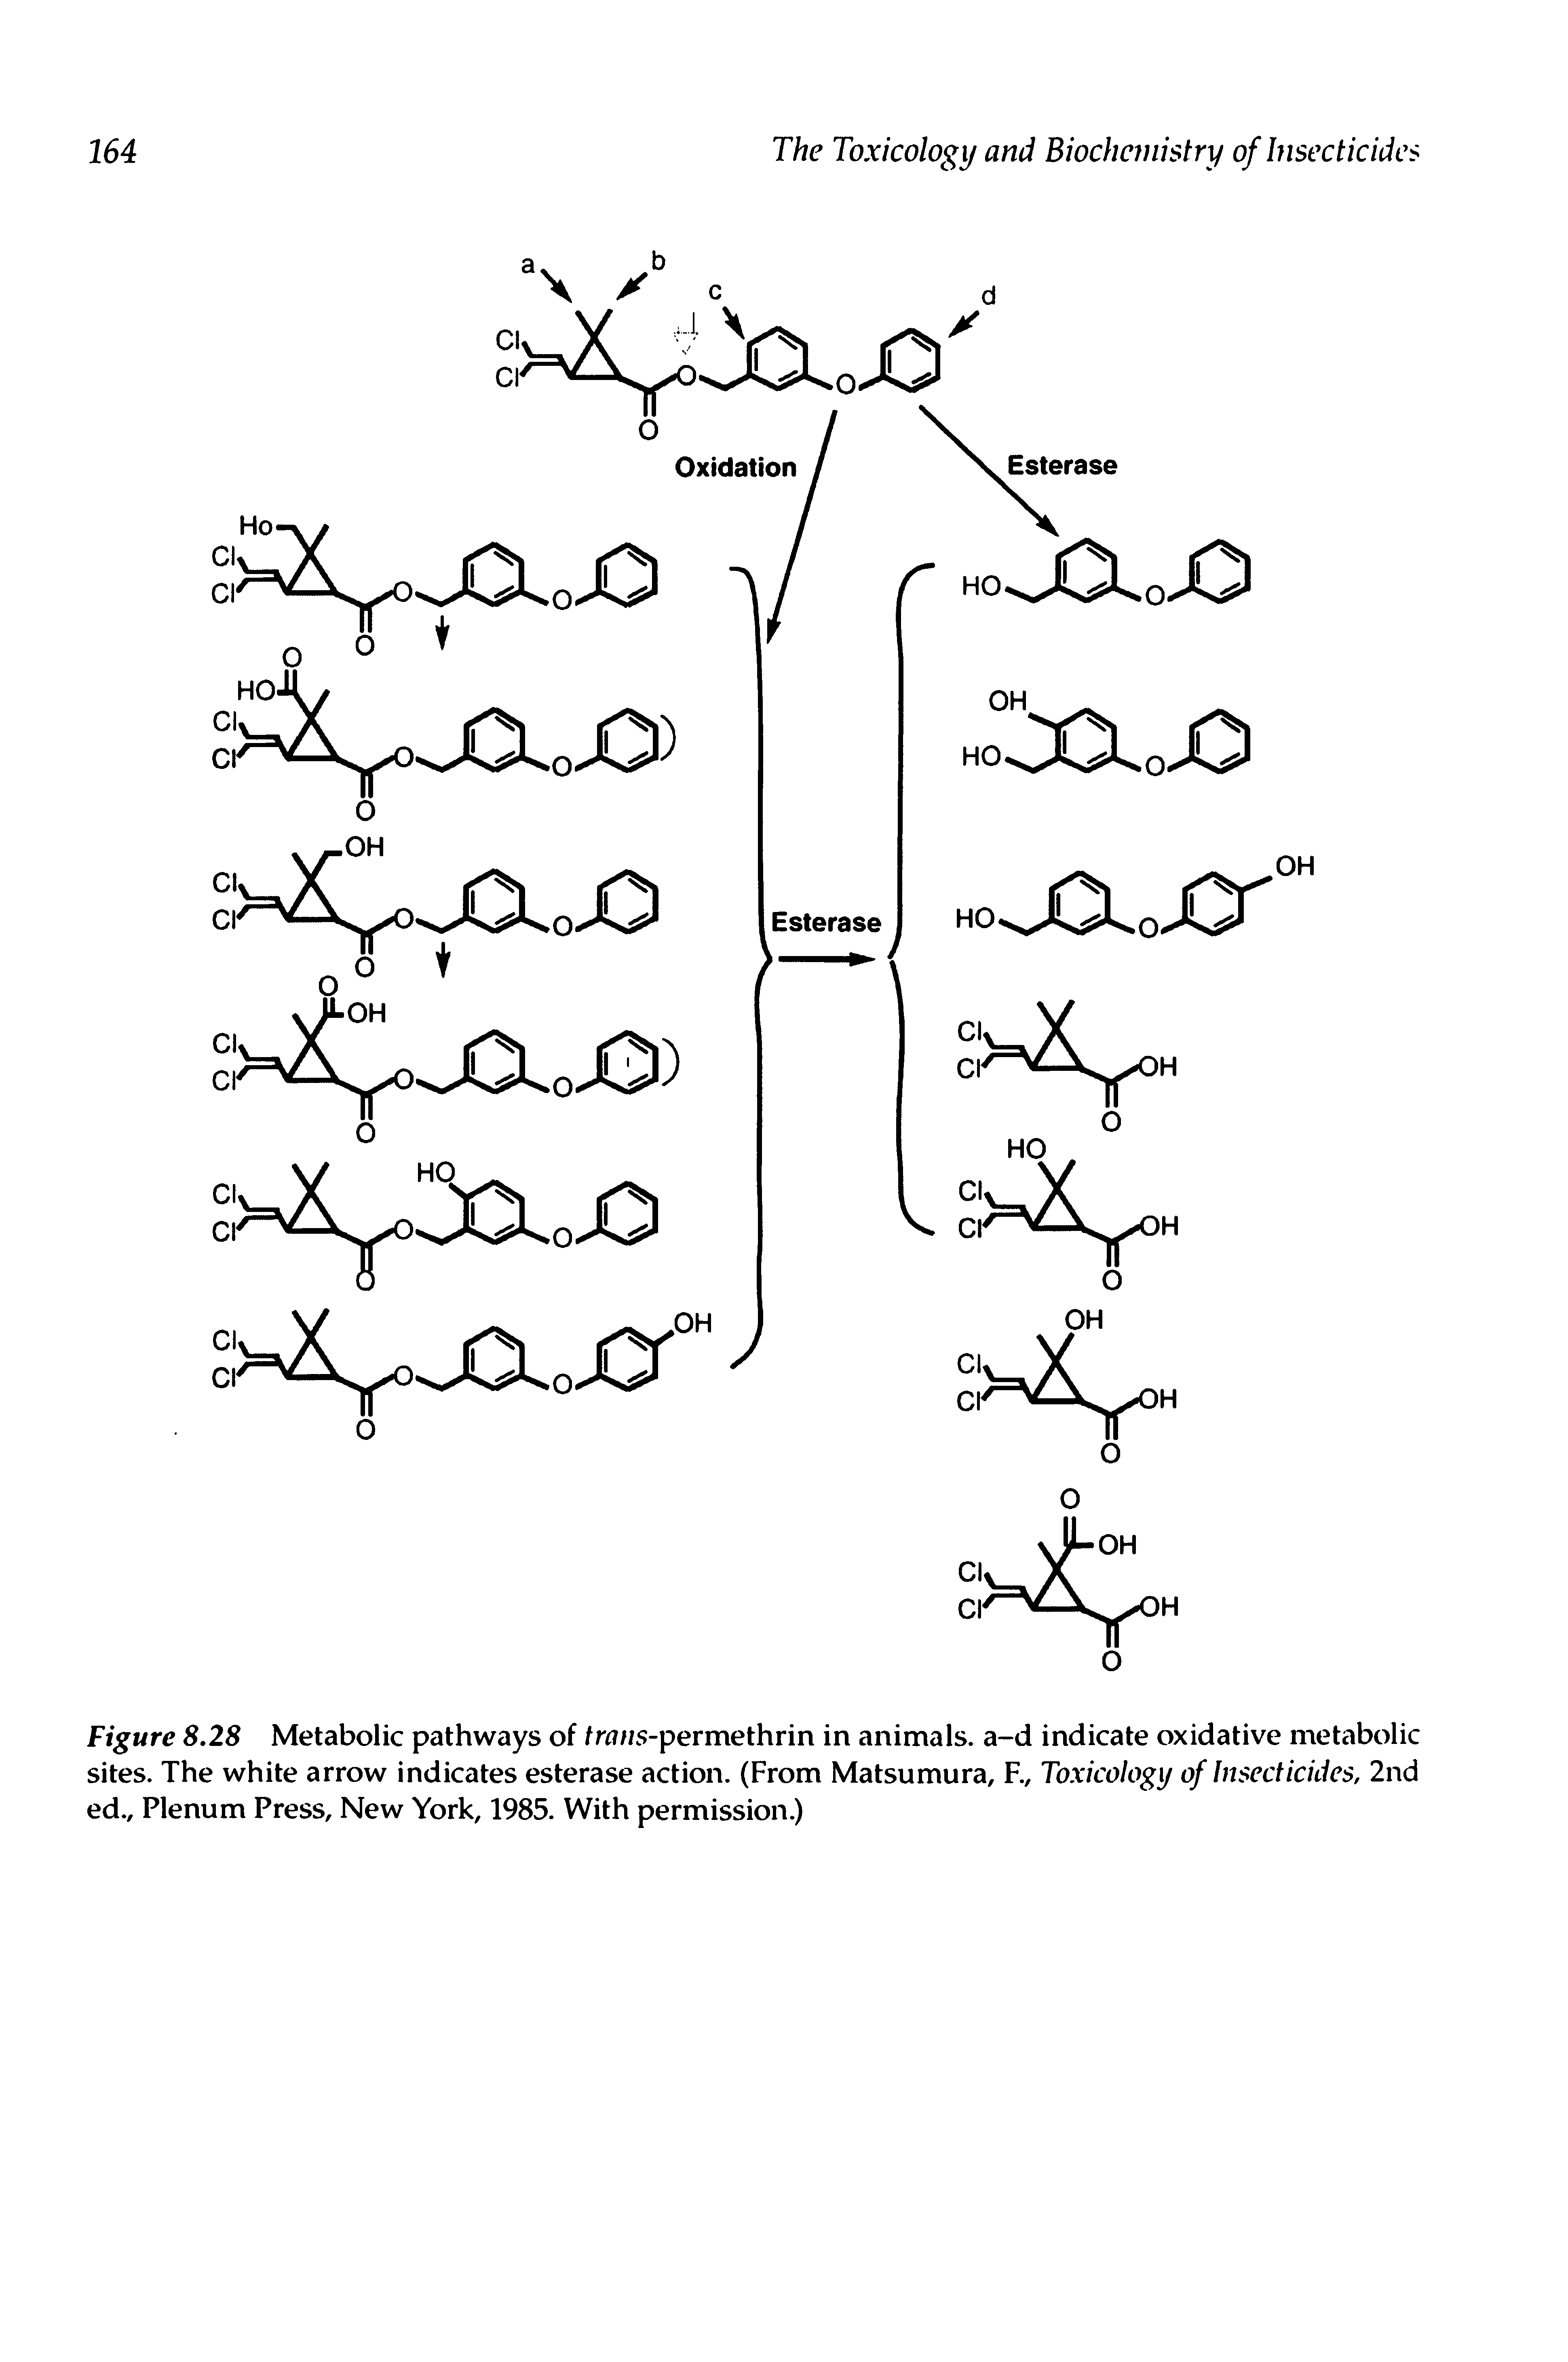 Figure 8.28 Metabolic pathways of trans-permethrin in animals, a-d indicate oxidative metabolic sites. The white arrow indicates esterase action. (From Matsu mu ra, F., Toxicology of Insecticides, 2nd ed., Plenum Press, New York, 1985. With permission.)...